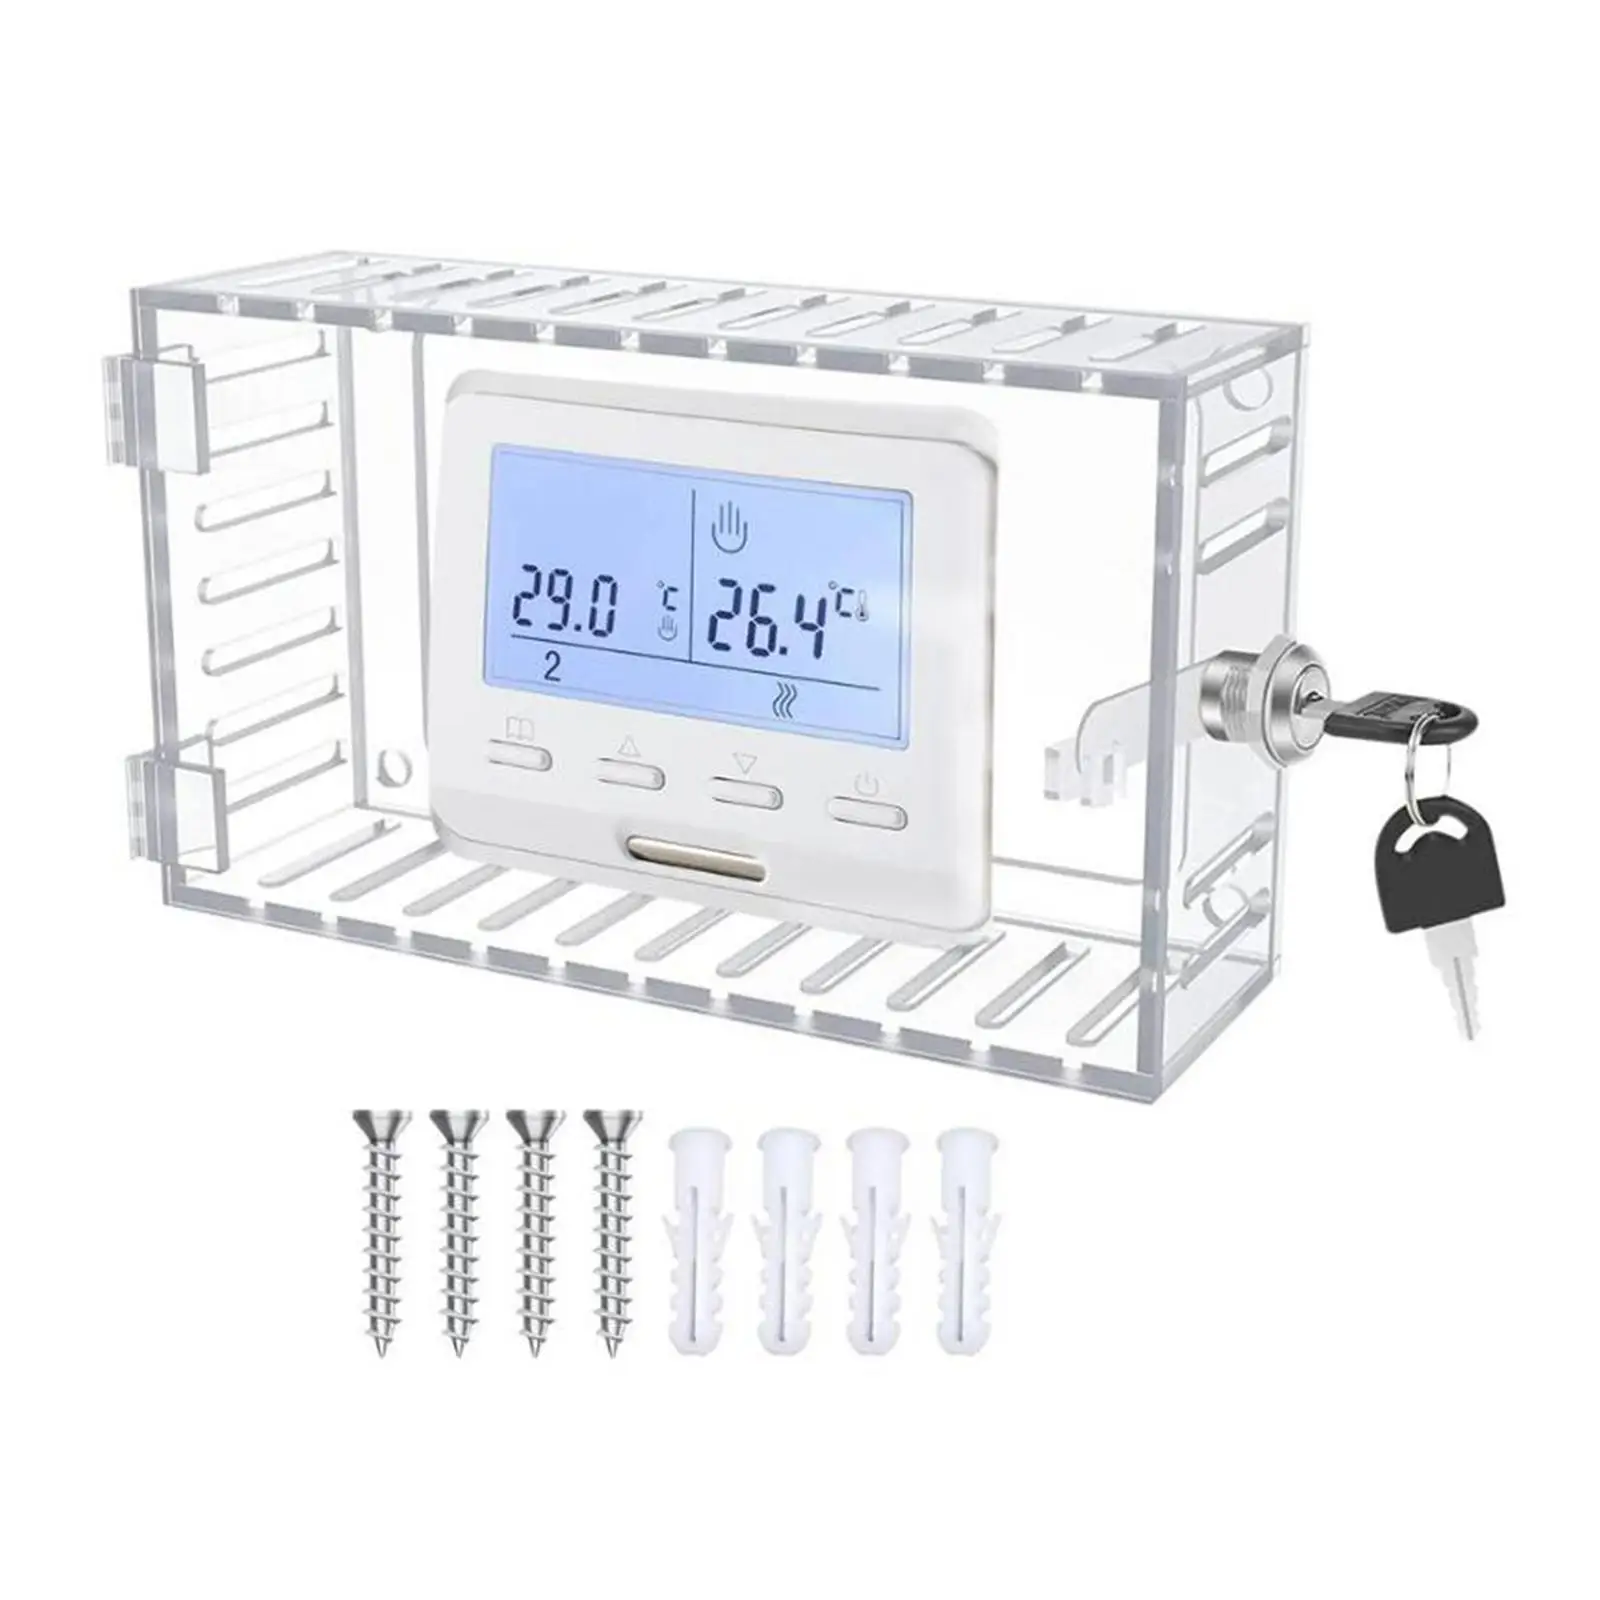 A/C Thermostat Lock Box with Key Universal Transparent Prevent Tampering Thermostat Cover for Public Office Schools Restaurants